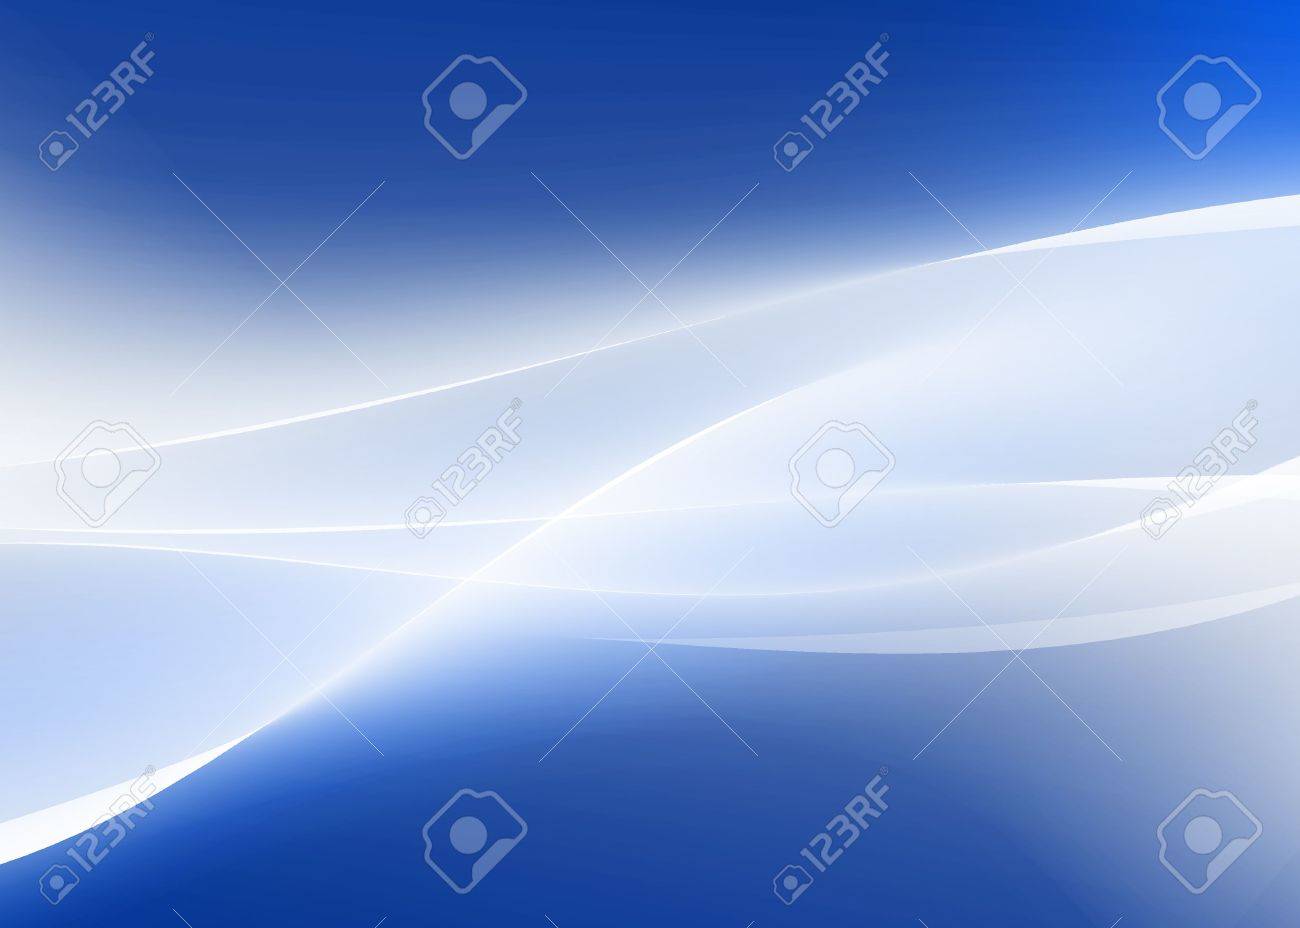 Abstract Asymmetrical Background In Blue And White Stock Photo